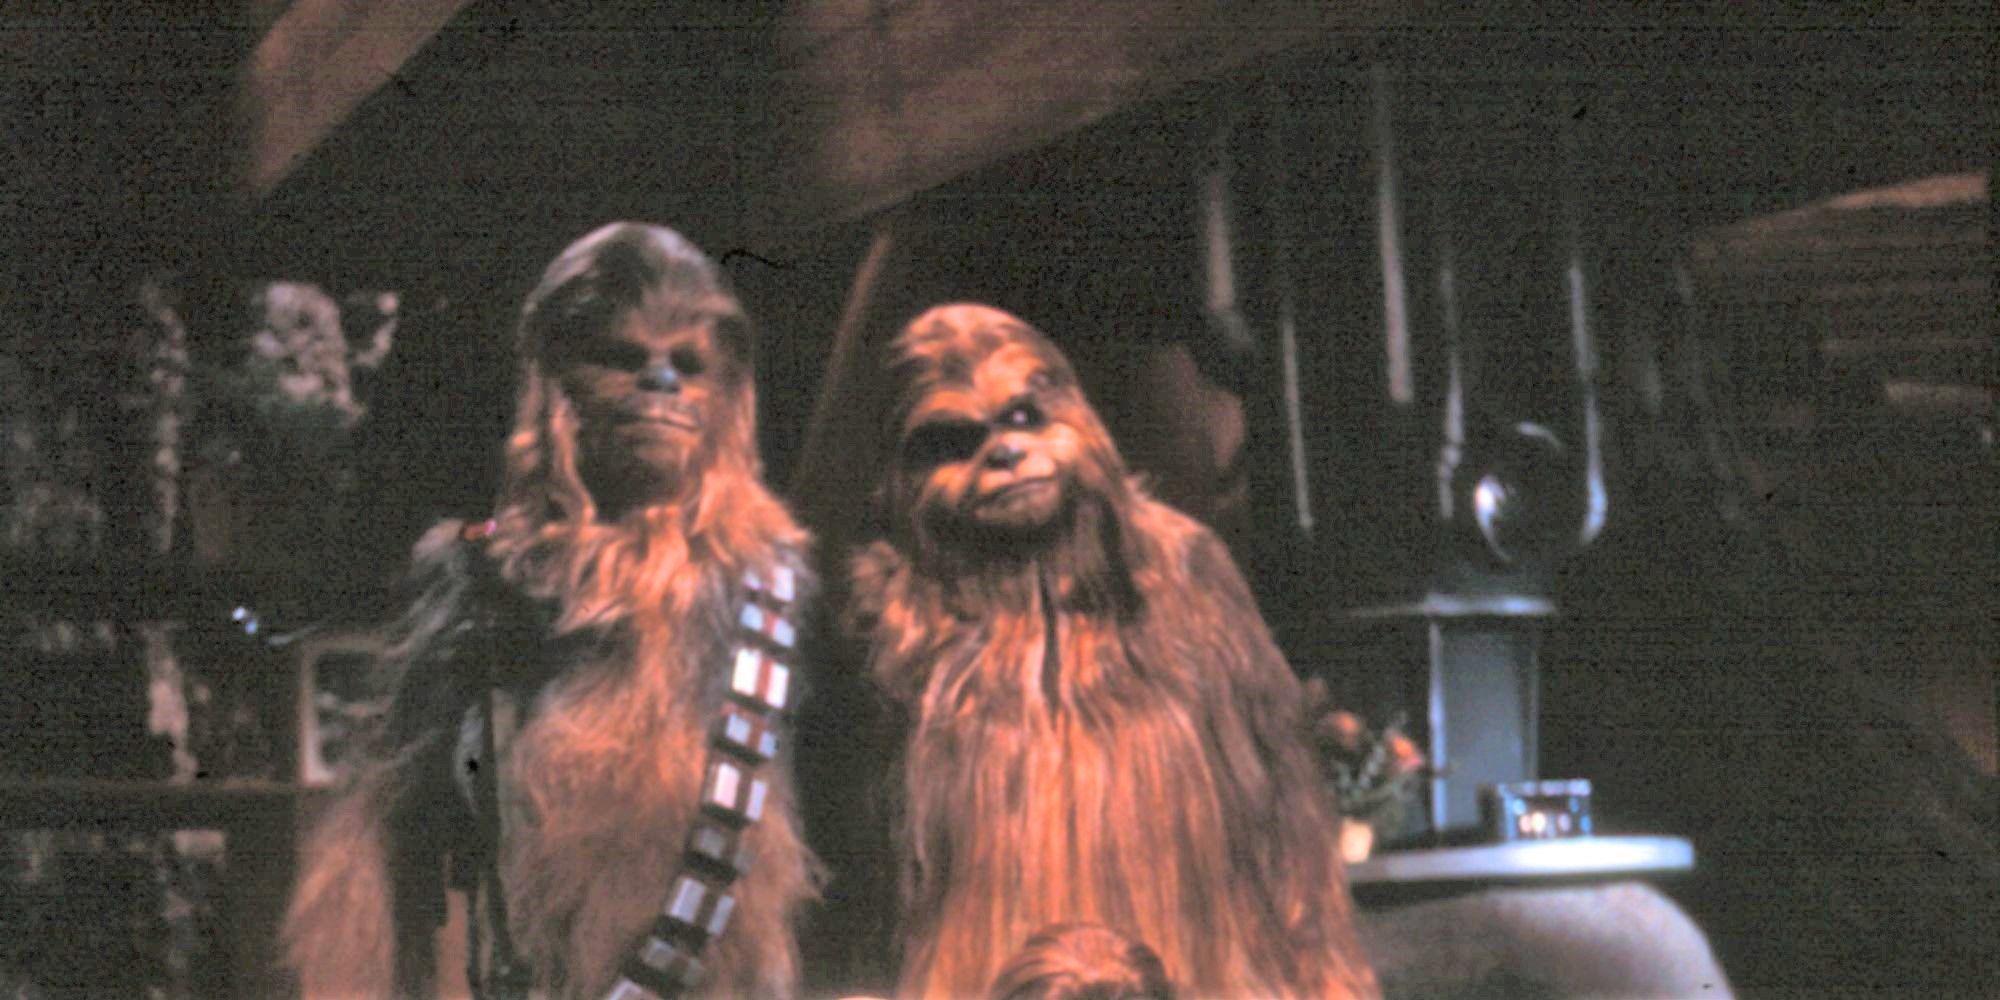 Chewbacca & Mallatobuck in The Star Wars Holiday Special 